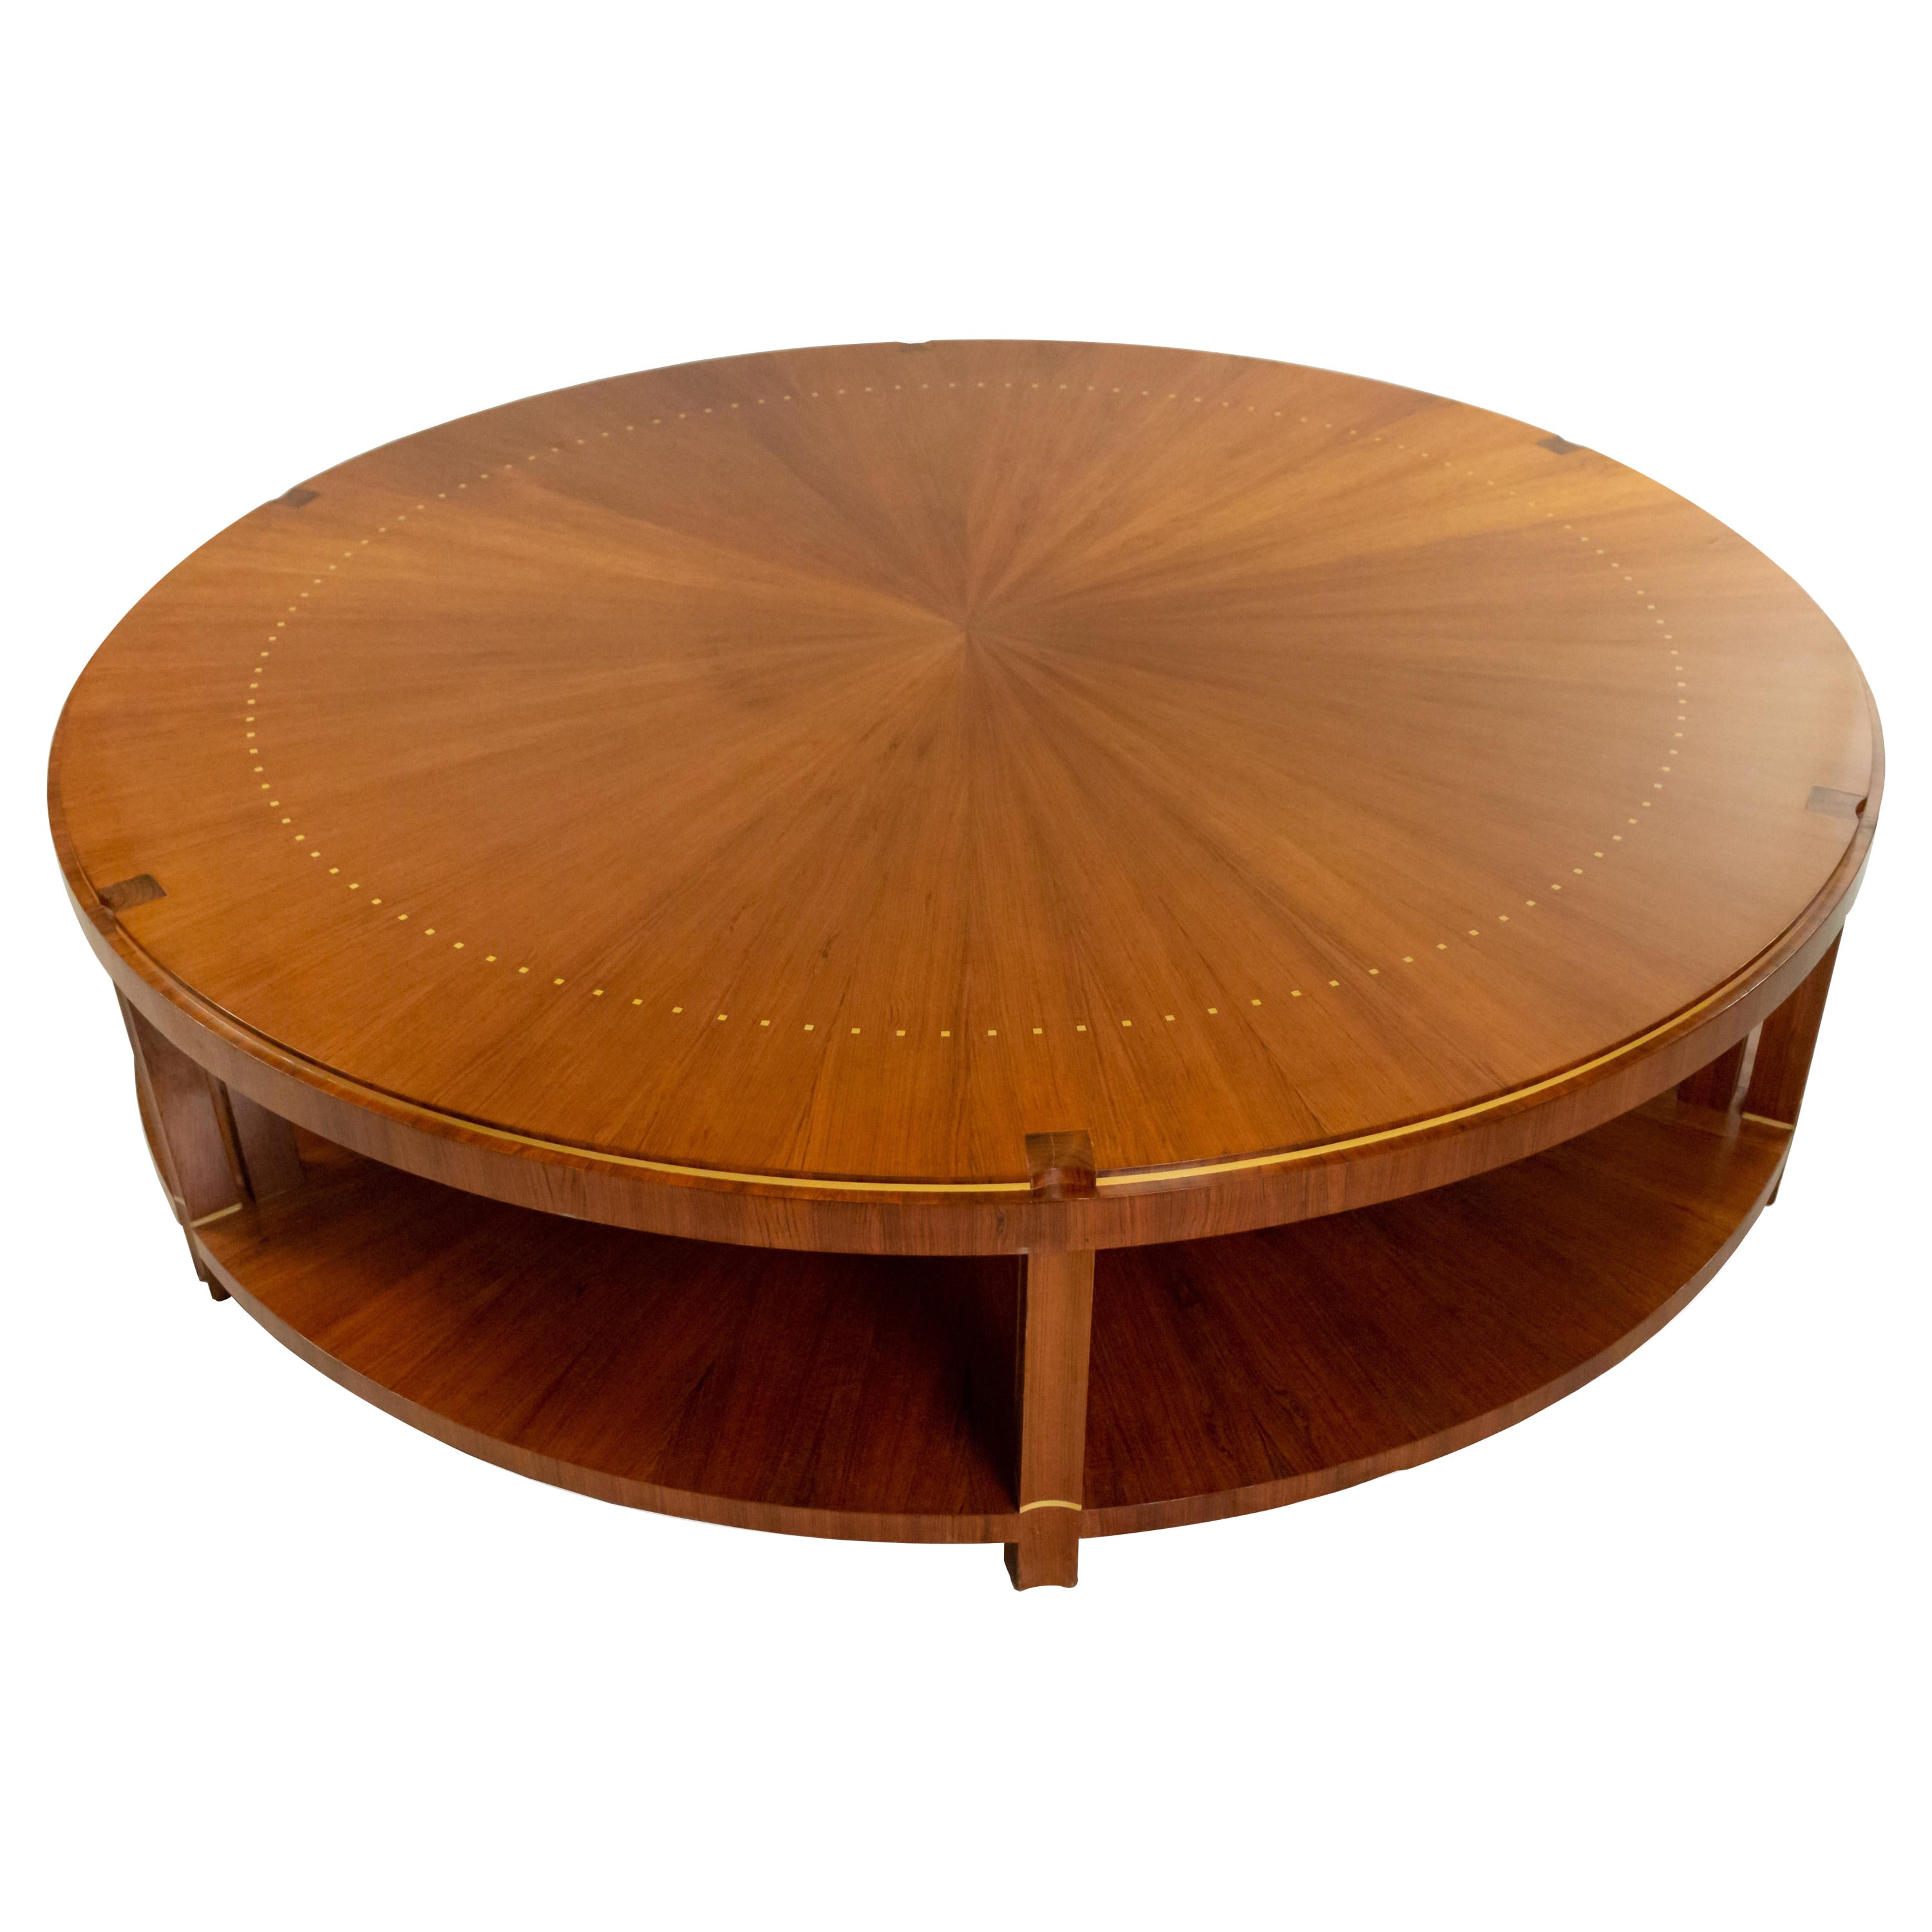 French Art Deco Round Rosewood Sunburst Coffee Table in the Manner of Ruhlmann